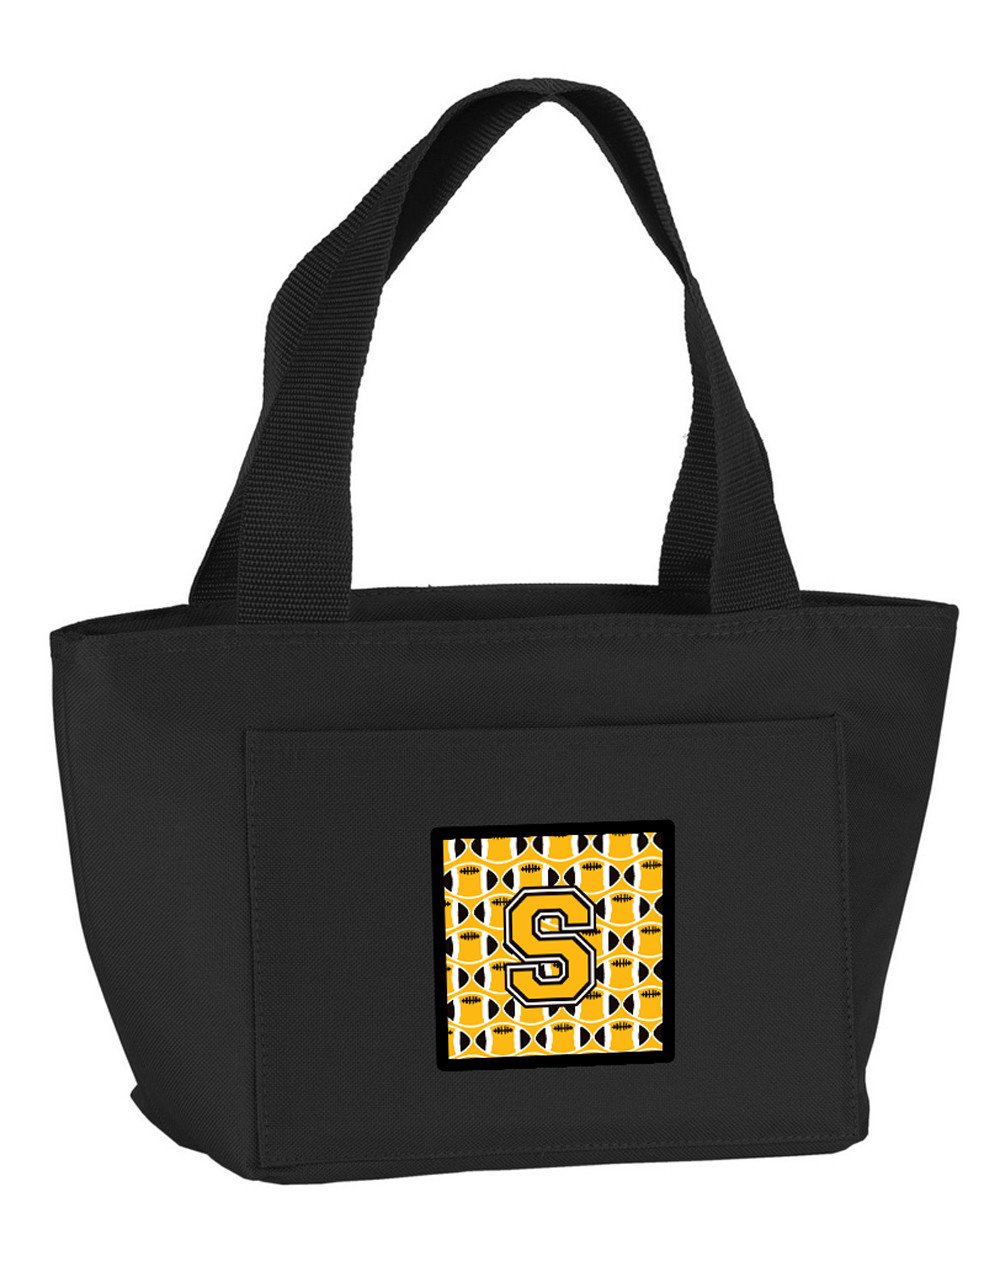 Letter S Football Black, Old Gold and White Lunch Bag CJ1080-SBK-8808 by Caroline's Treasures